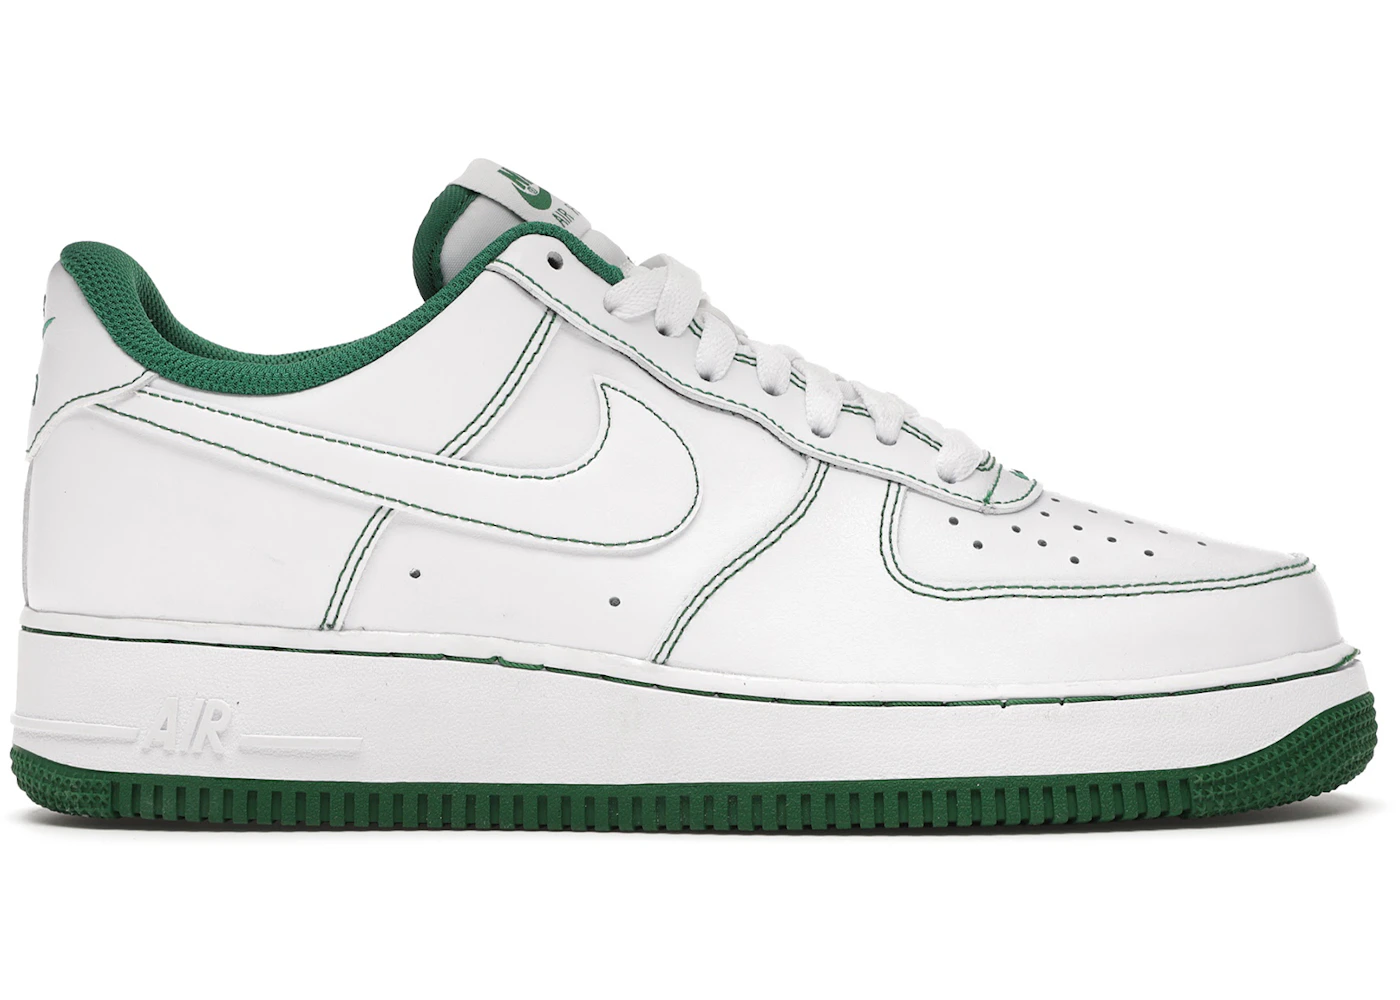 Nike Men's Air Force 1 '07 Contrast Stitch Casual Shoes